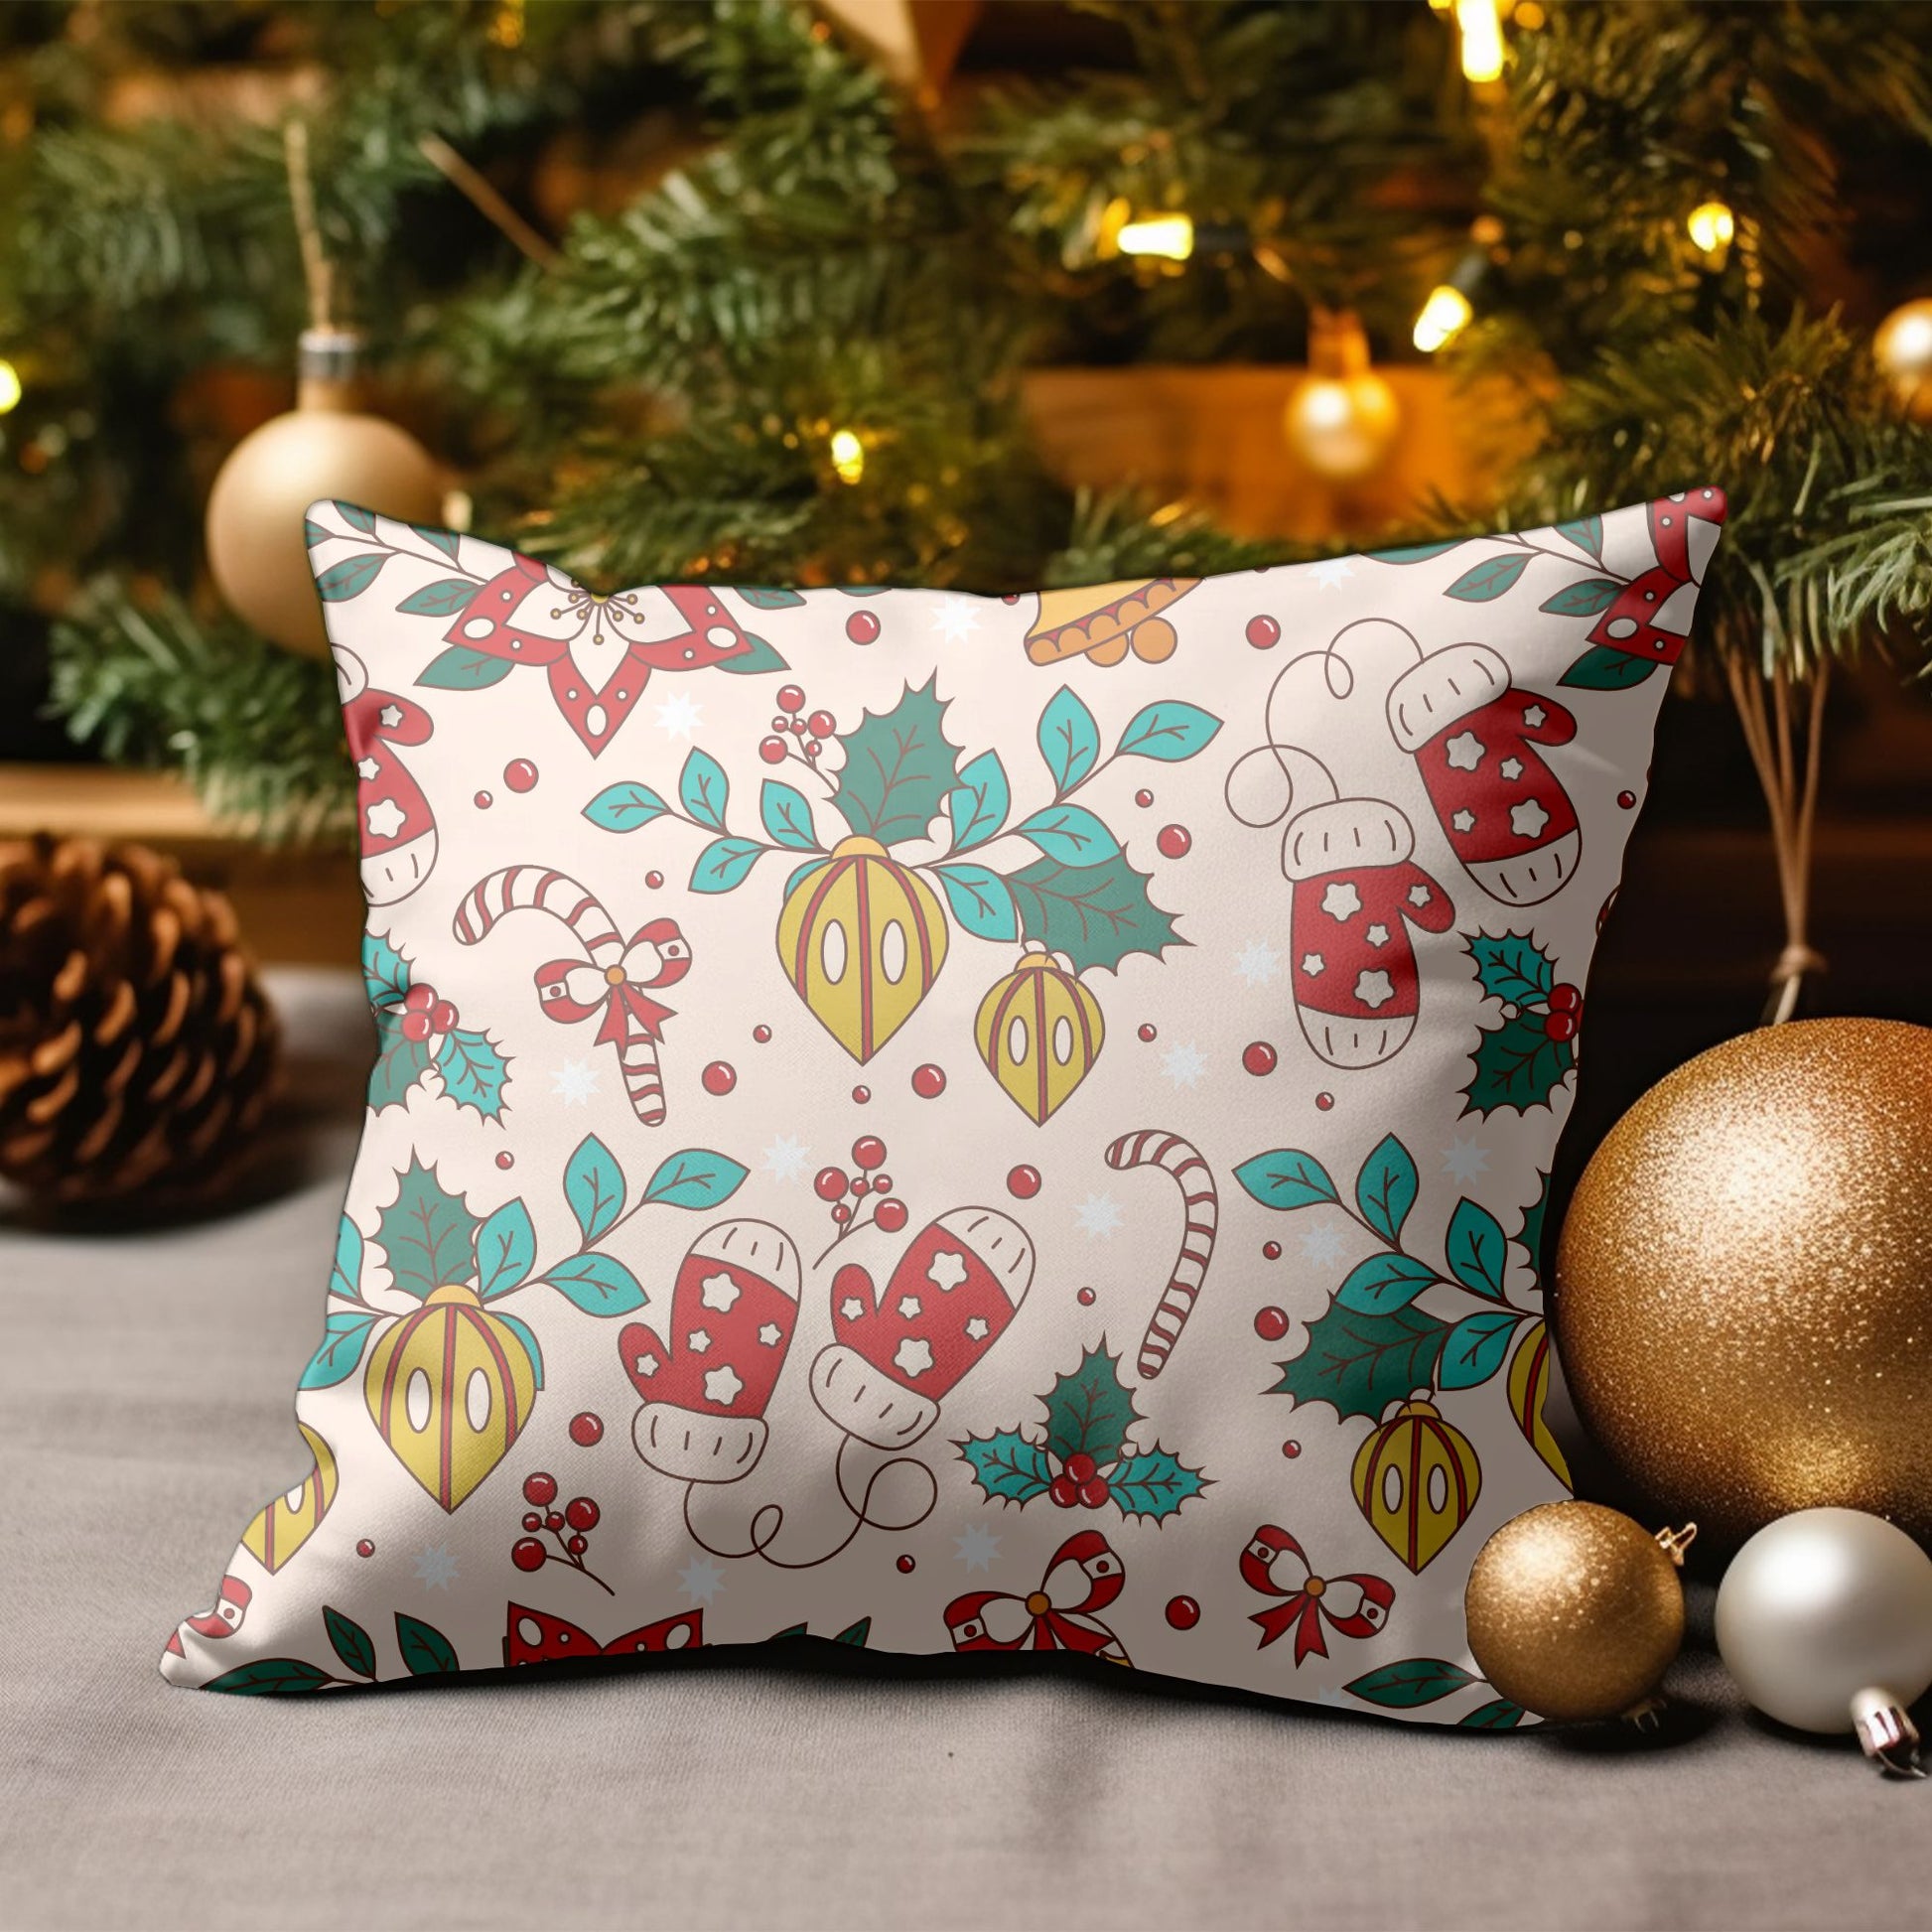 Red and Green Holiday Decor Pillow with 'Joy' Typography